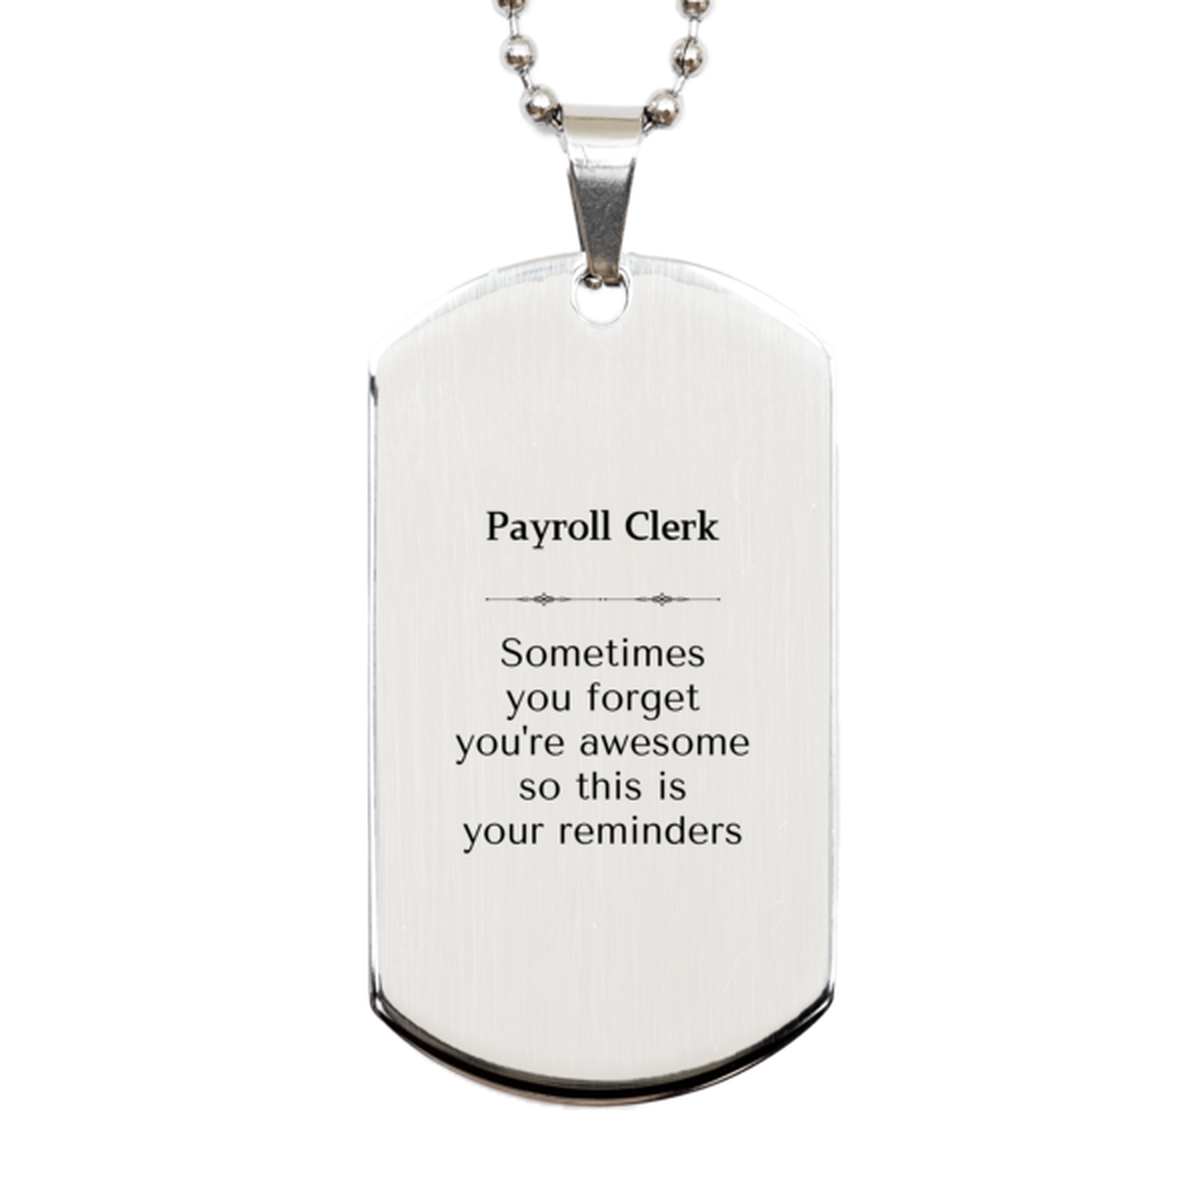 Sentimental Payroll Clerk Silver Dog Tag, Payroll Clerk Sometimes you forget you're awesome so this is your reminders, Graduation Christmas Birthday Gifts for Payroll Clerk, Men, Women, Coworkers